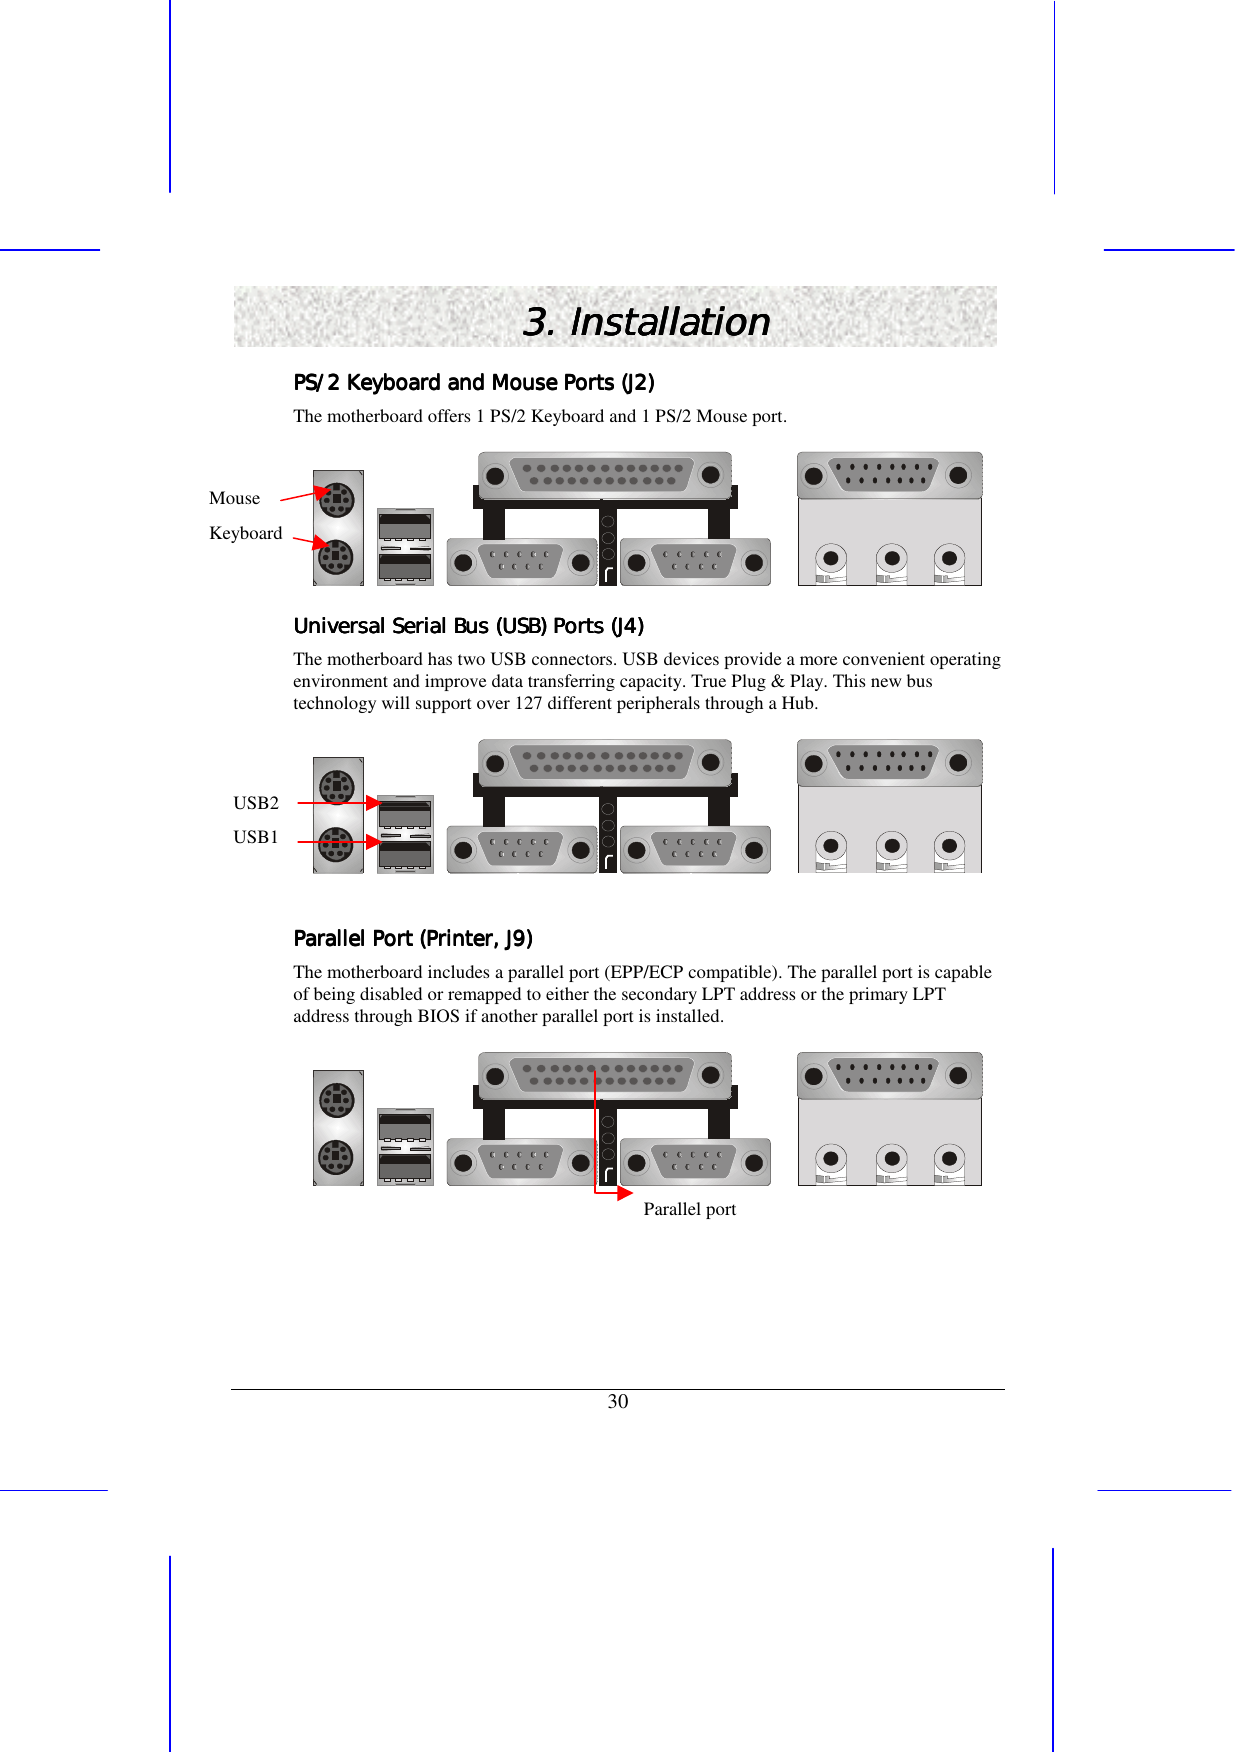   30 3. Installation3. Installation3. Installation3. Installation    PS/2 Keyboard and Mouse Ports (J2)PS/2 Keyboard and Mouse Ports (J2)PS/2 Keyboard and Mouse Ports (J2)PS/2 Keyboard and Mouse Ports (J2)    The motherboard offers 1 PS/2 Keyboard and 1 PS/2 Mouse port.  Universal Serial Bus (USB) Ports (J4)Universal Serial Bus (USB) Ports (J4)Universal Serial Bus (USB) Ports (J4)Universal Serial Bus (USB) Ports (J4)    The motherboard has two USB connectors. USB devices provide a more convenient operating environment and improve data transferring capacity. True Plug &amp; Play. This new bus technology will support over 127 different peripherals through a Hub.      Parallel Port (PrinterParallel Port (PrinterParallel Port (PrinterParallel Port (Printer, J9, J9, J9, J9))))    The motherboard includes a parallel port (EPP/ECP compatible). The parallel port is capable of being disabled or remapped to either the secondary LPT address or the primary LPT address through BIOS if another parallel port is installed.    Parallel port Mouse Keyboard USB2 USB1 